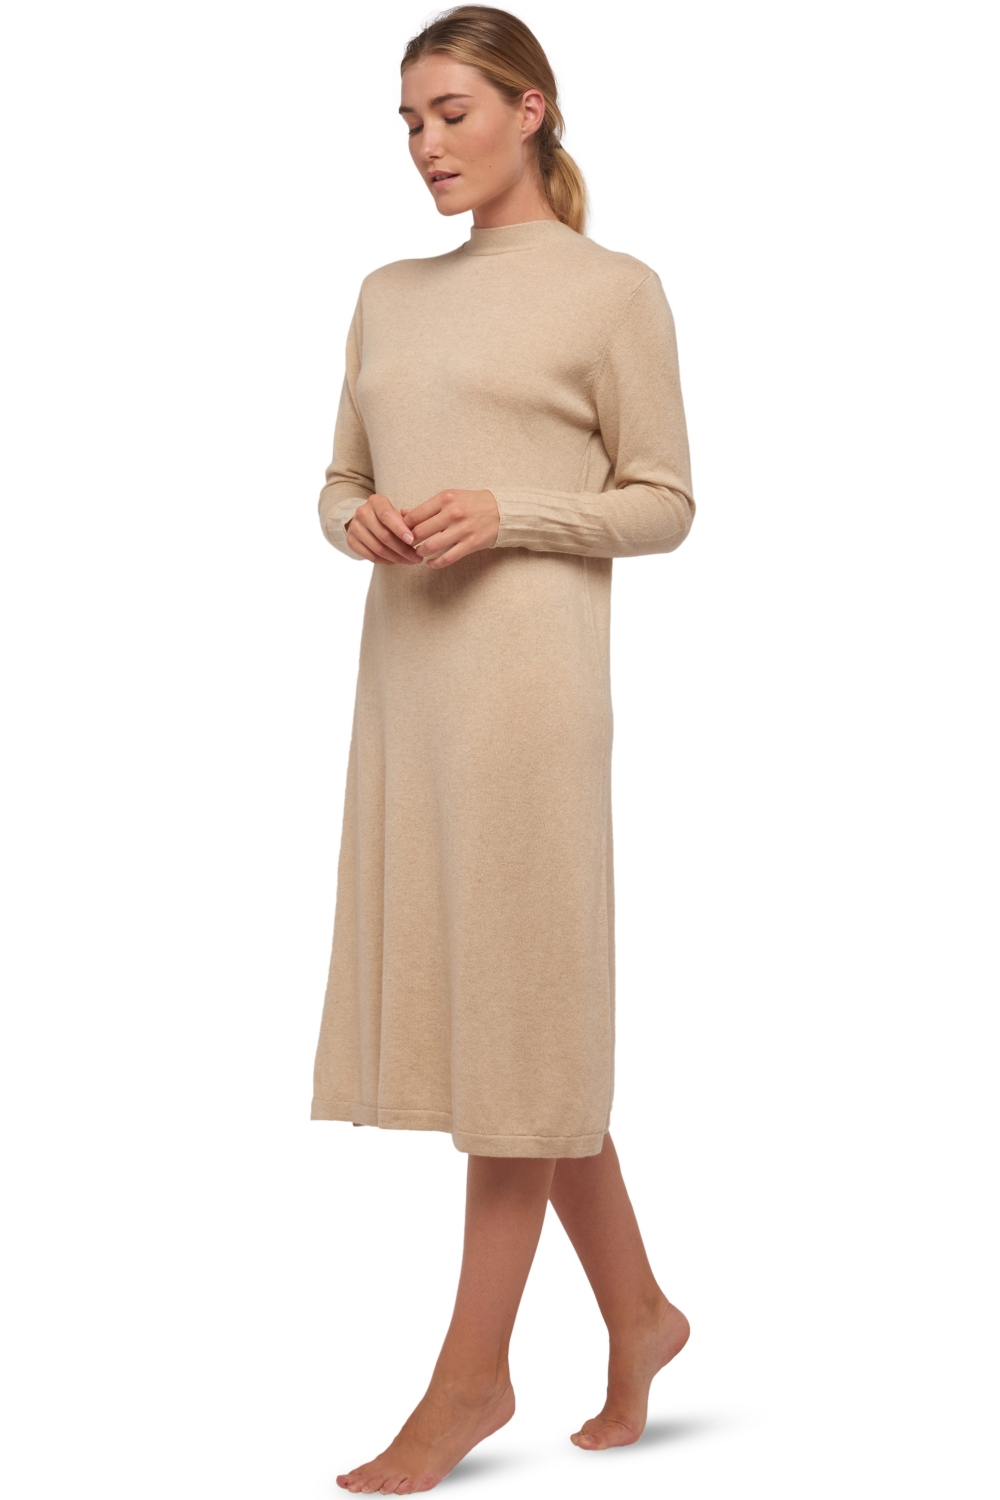 Cashmere donna cappotti wendy natural beige s